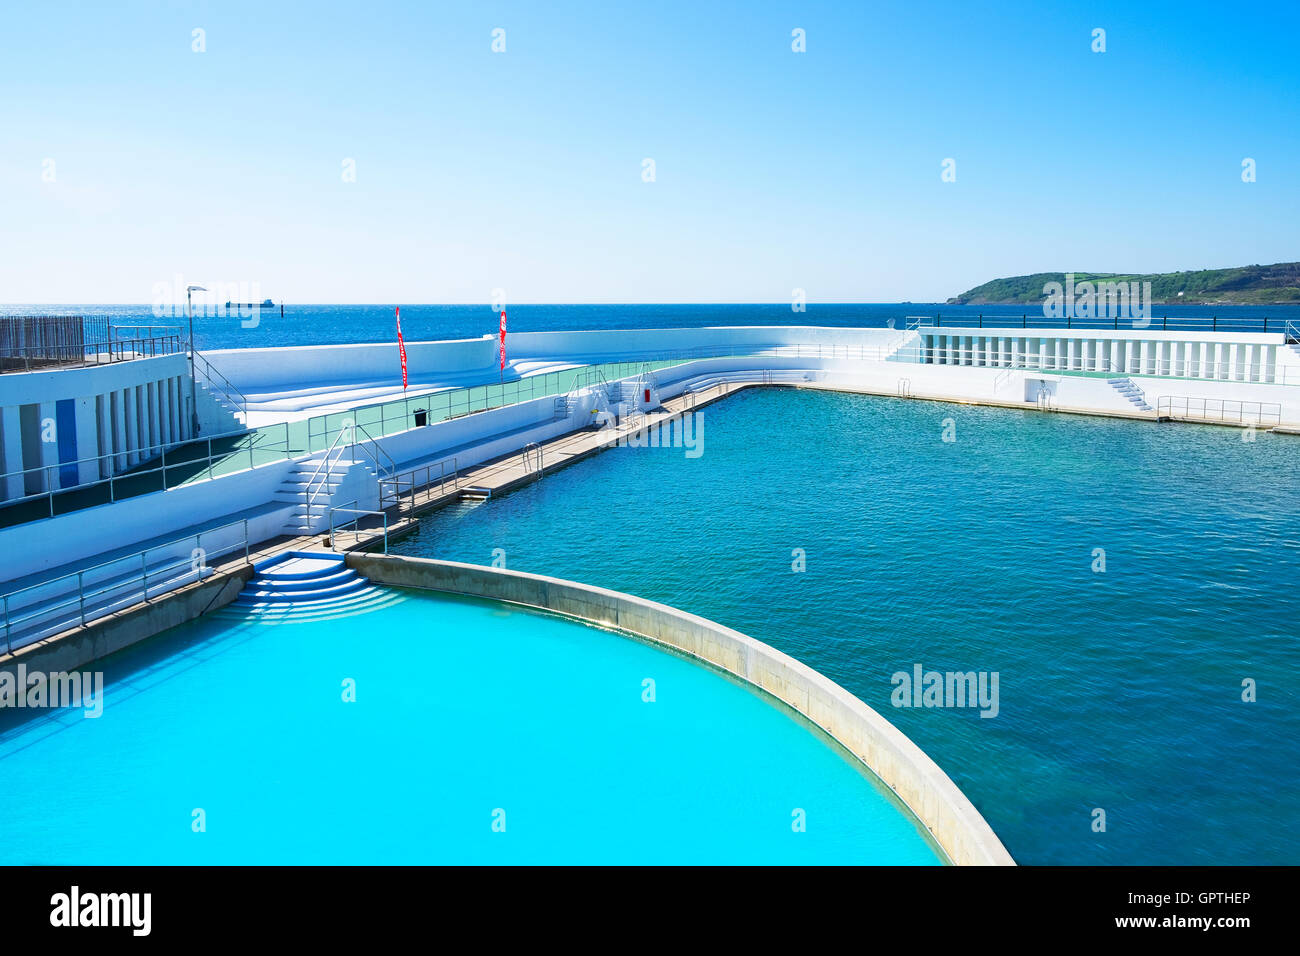 The Lido open air jubilee swimming pool on the coast at Penzance in Cornwall, England, UK Stock Photo